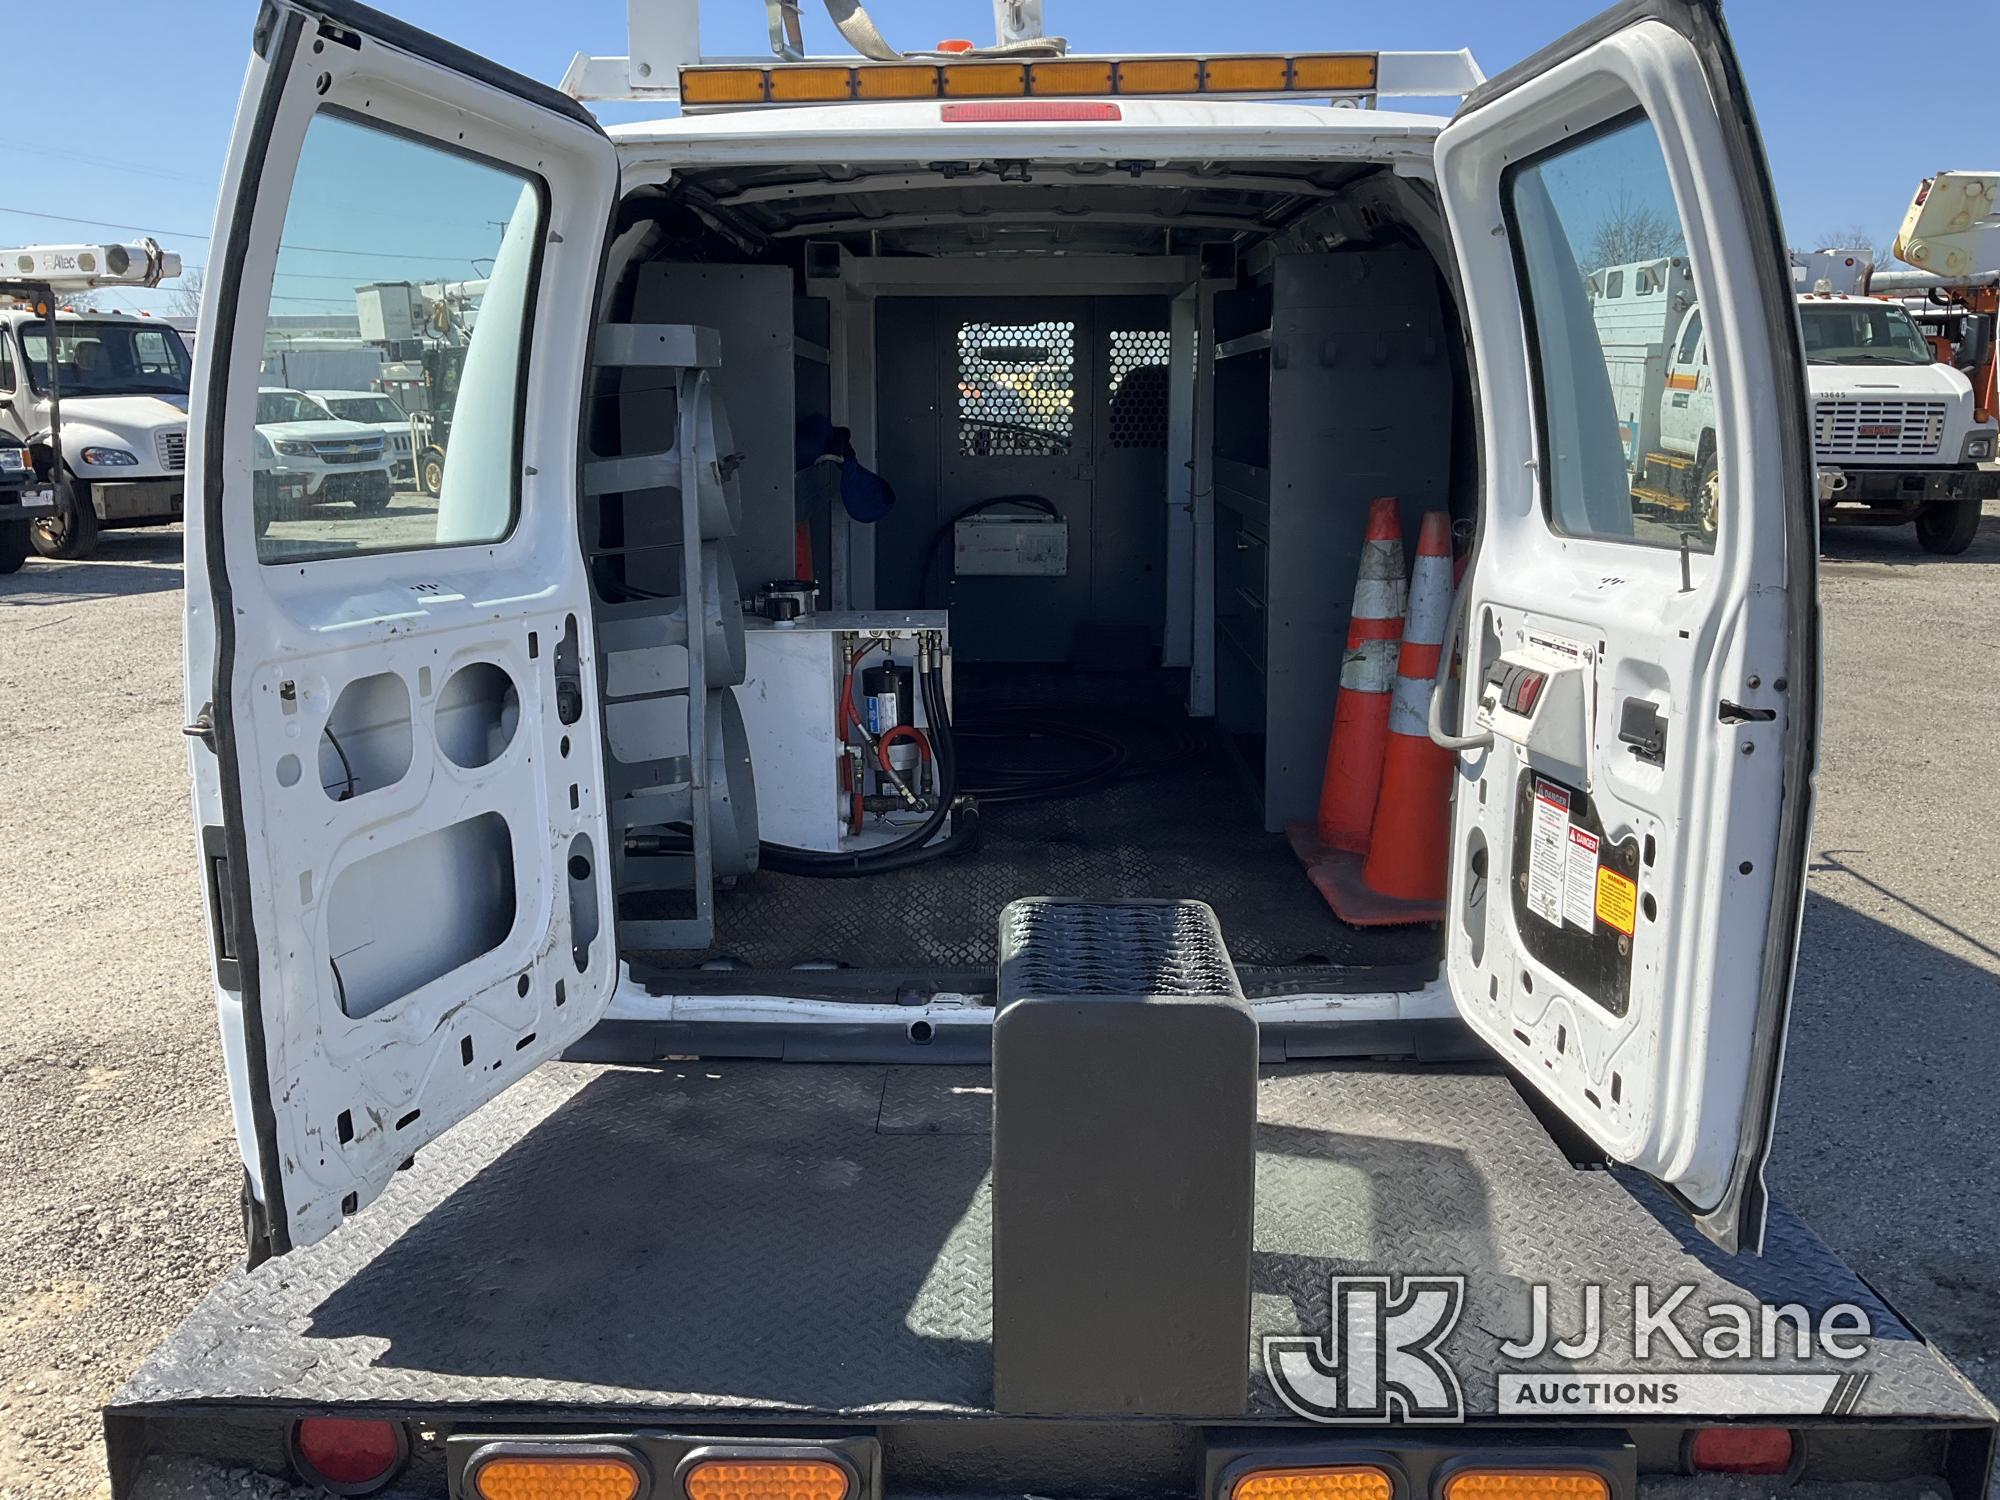 (Plymouth Meeting, PA) ETI ETT29-SNV, Telescopic Non-Insulated Bucket Van mounted on 2008 Ford E350